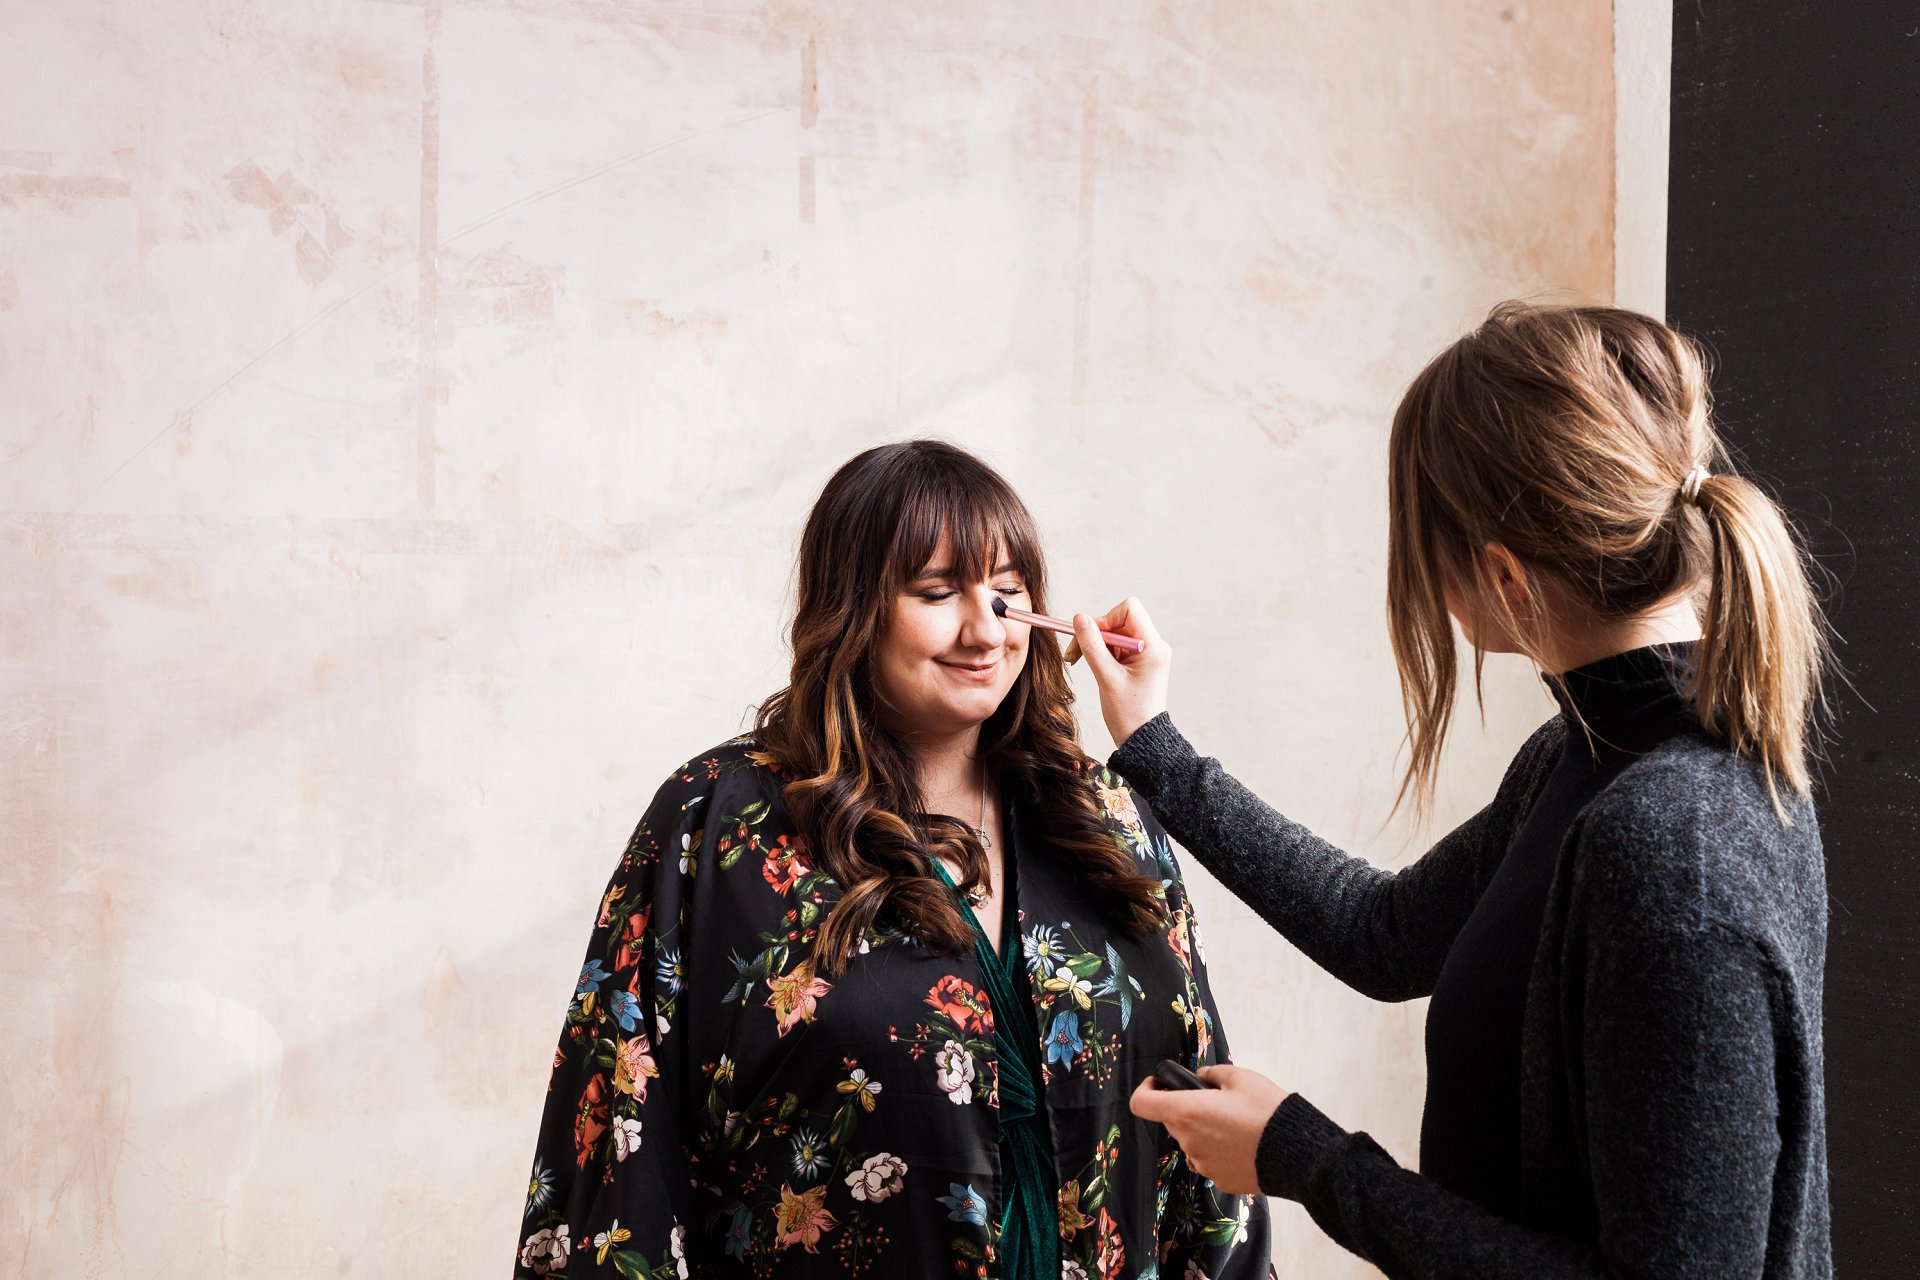 brand shoot hair and makeup artist Pipa working with Nicki James on a shoot. Image by London branding photographer AKP Branding Stories